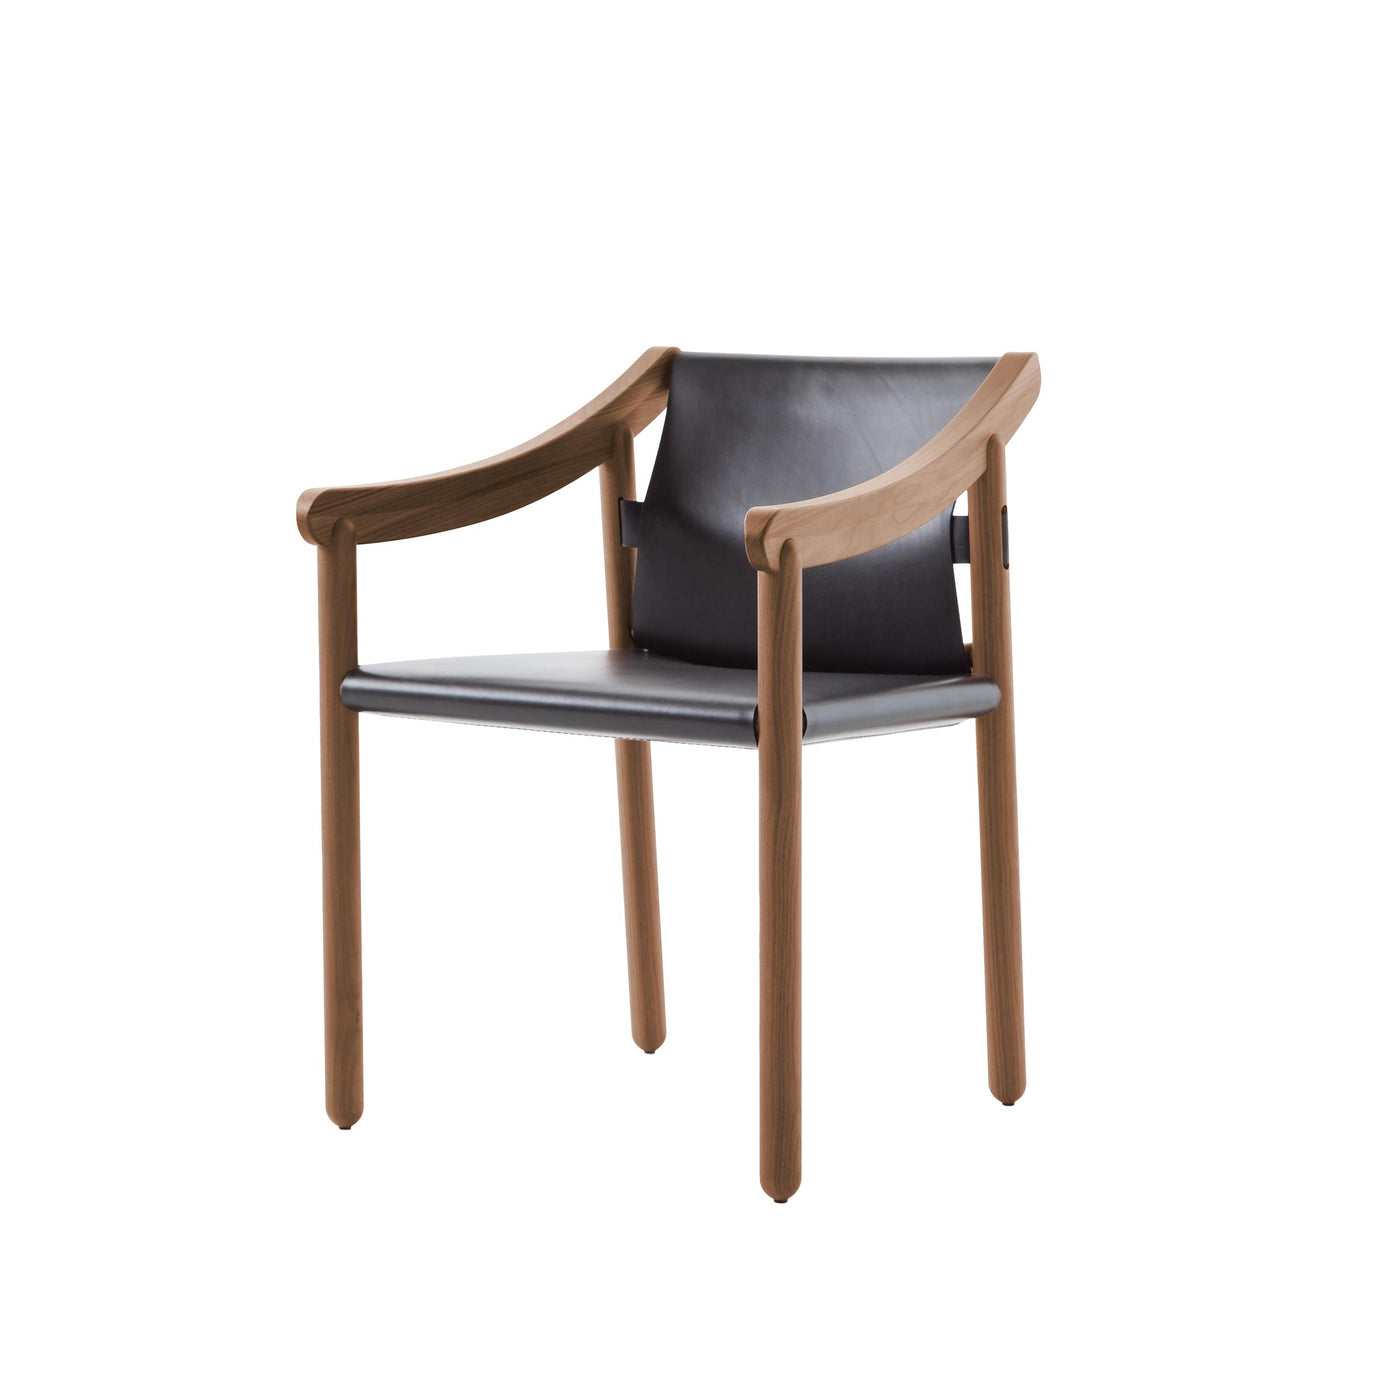 Wood and Saddle Leather Chair 905 by Vico Magistretti for Cassina 01